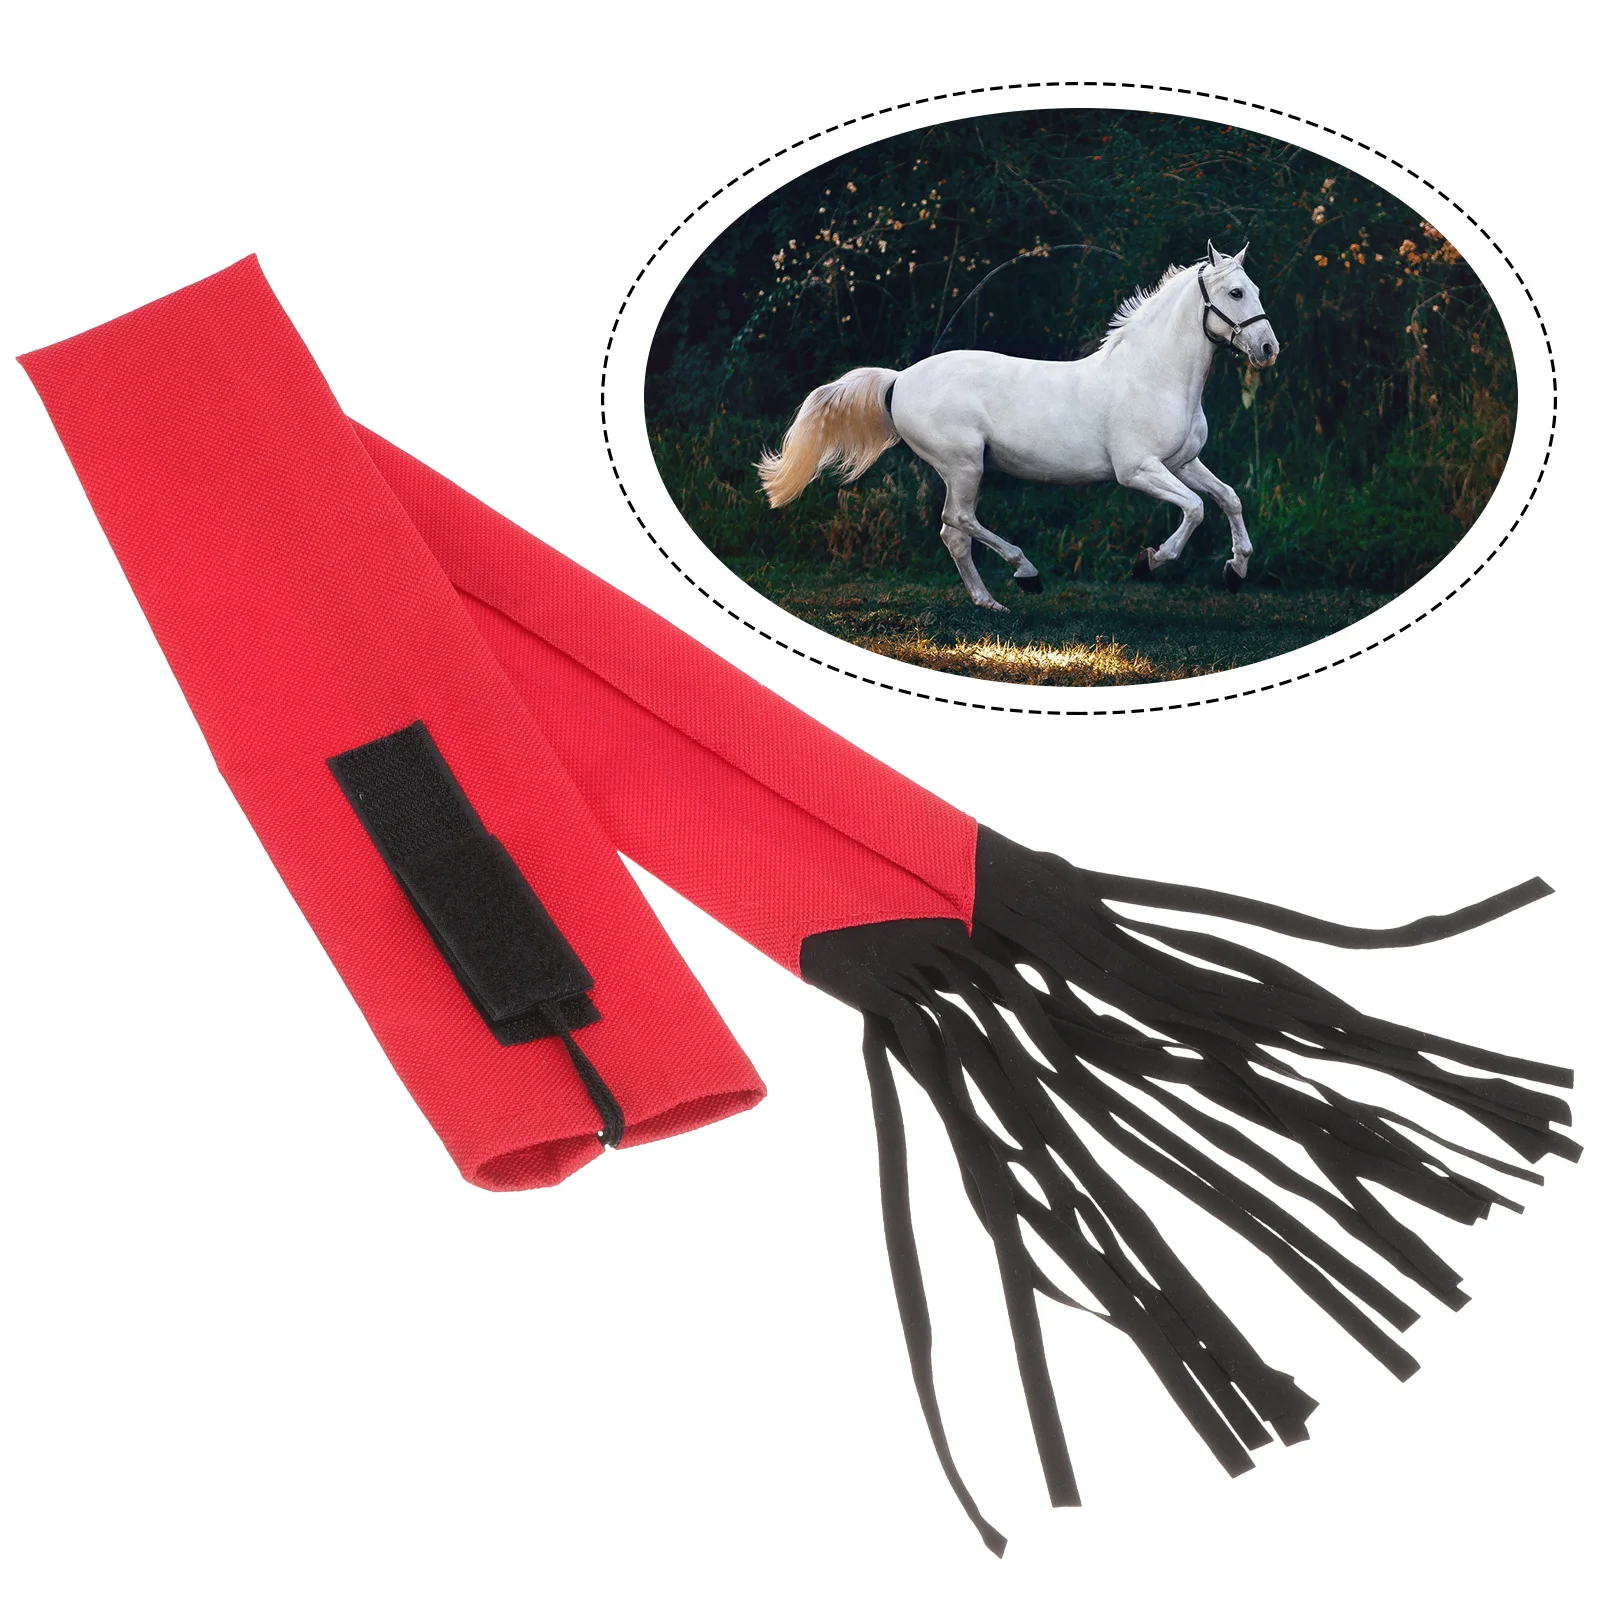 

Horse Tail Decor Anti-dirty Bag Cover Bags Non-woven Fabric Farm Supplies Protective Grooming Tools Cattle Tails Holder